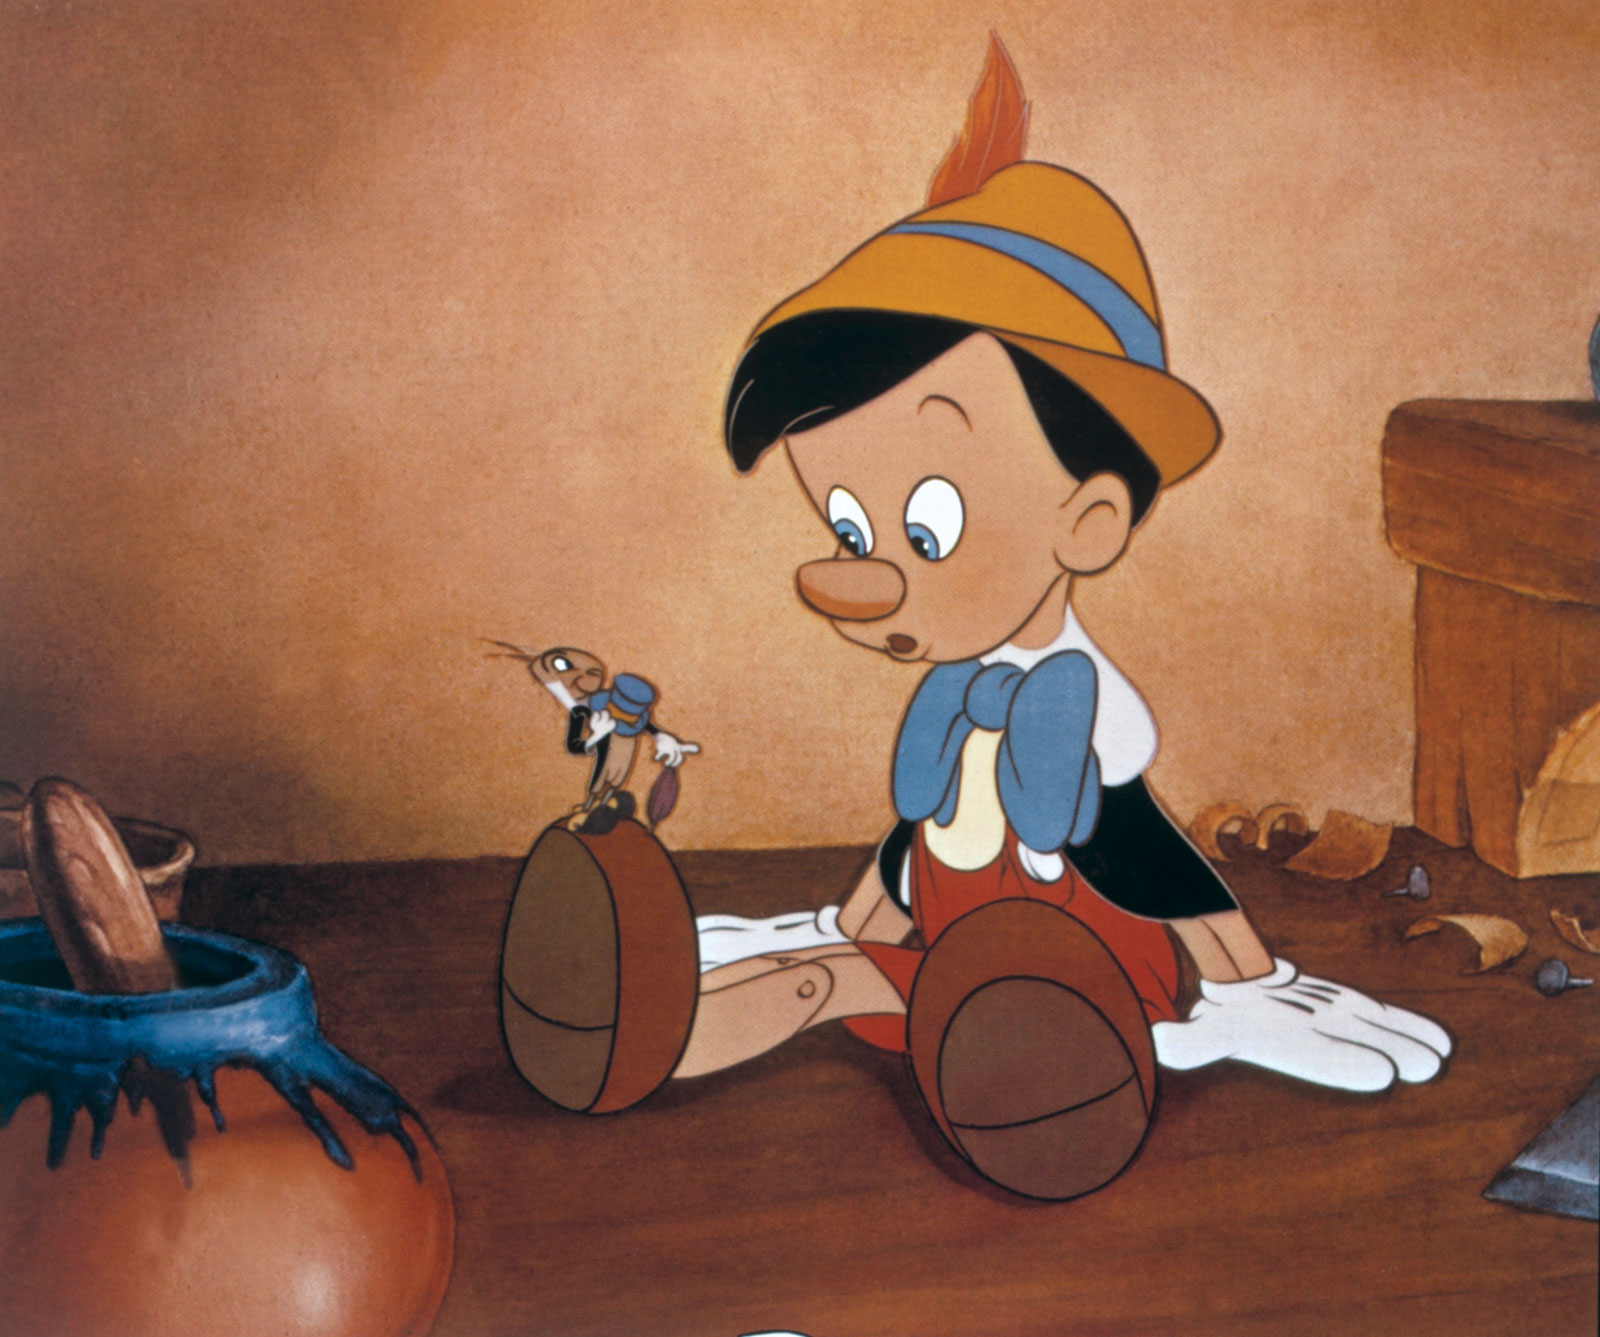 Back To The Future Director In Talks To Helm Disney’s Live-Action Pinocchio